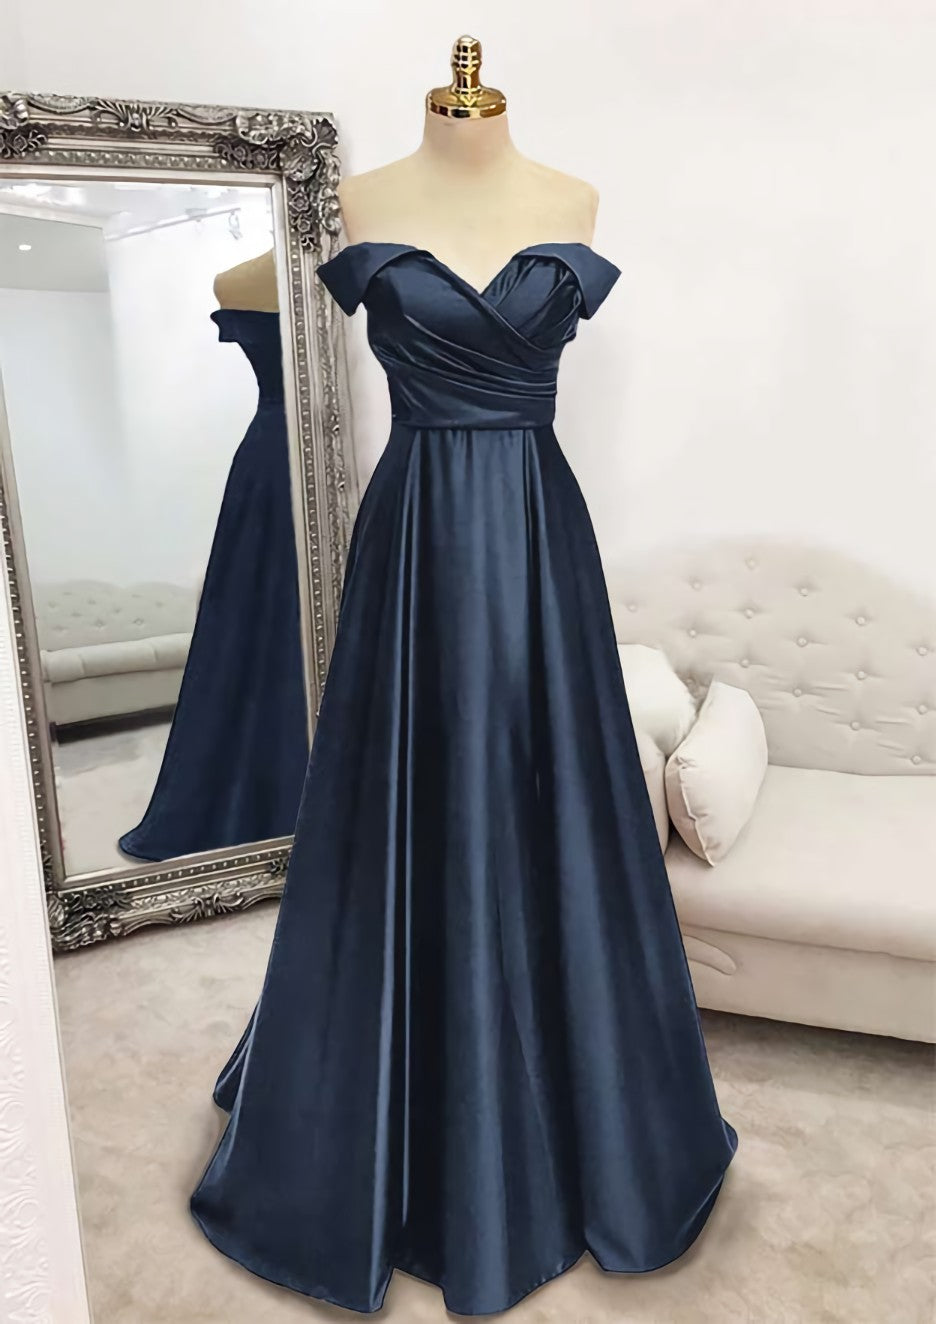 A Line Off The Shoulder Sleeveless Long Floor Length Satin Prom Dress With Pleated